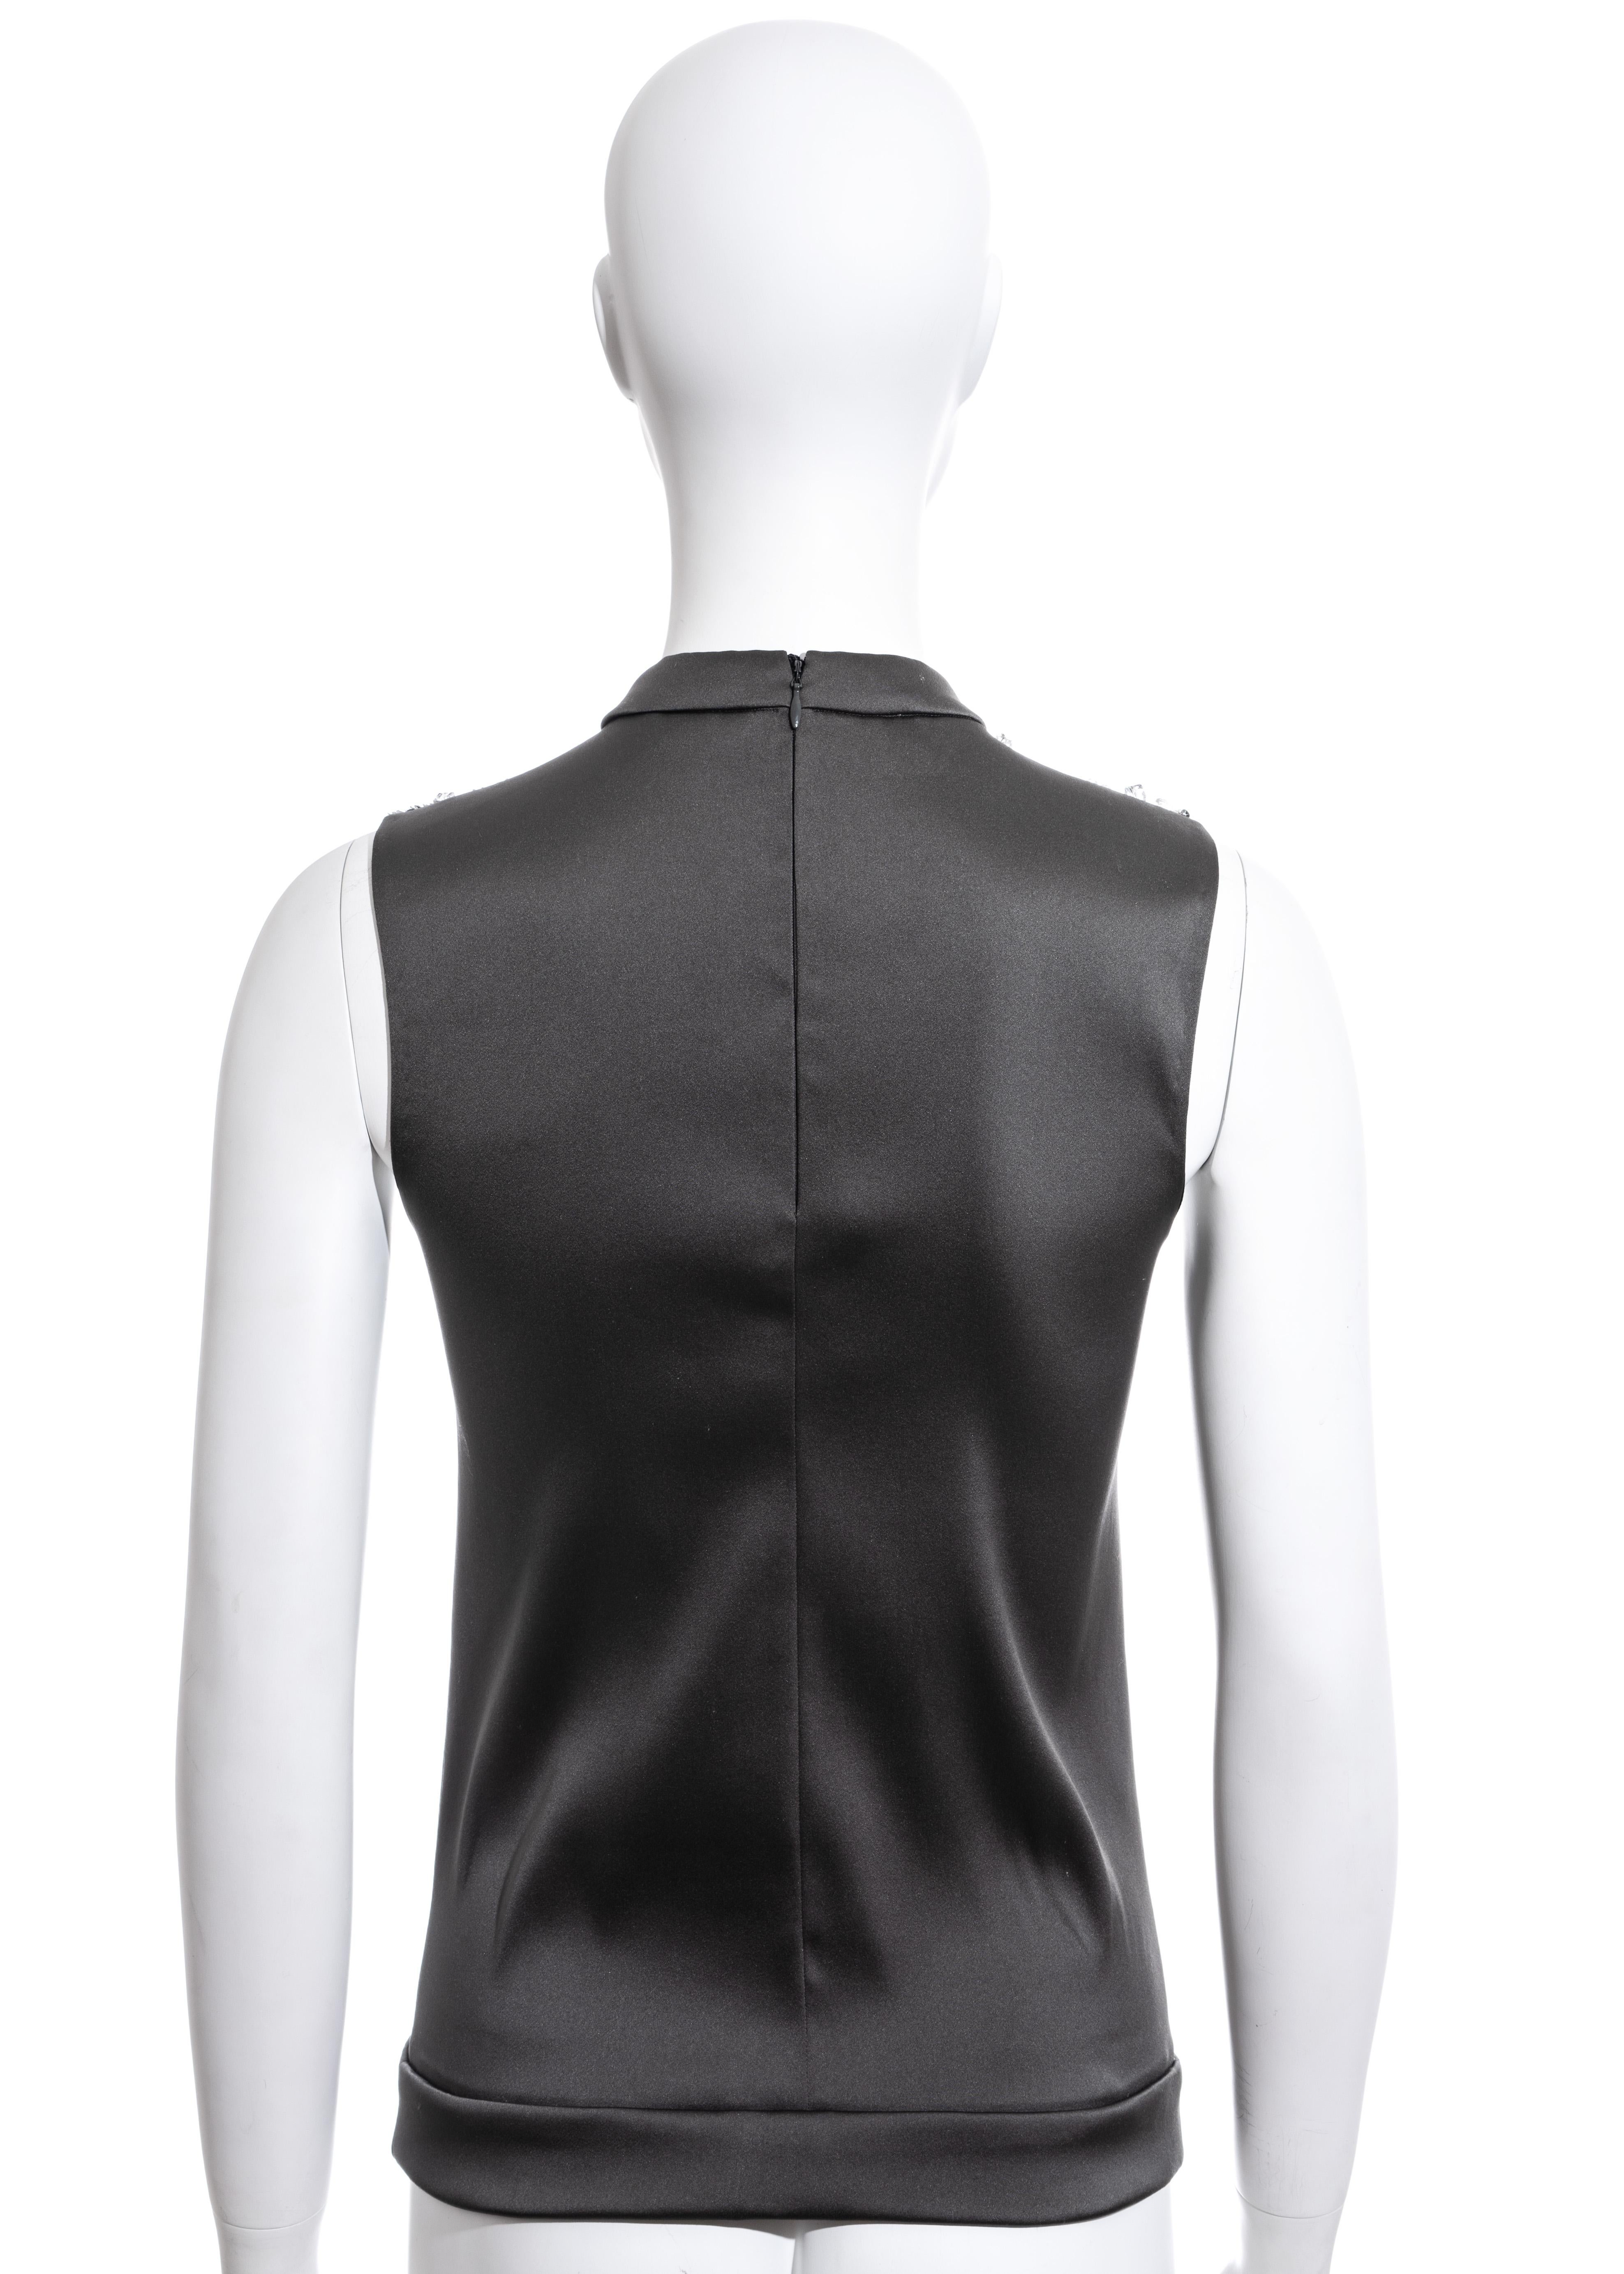 Prada grey jersey evening vest with crystal embellishments, ss 2010 In Excellent Condition For Sale In London, GB